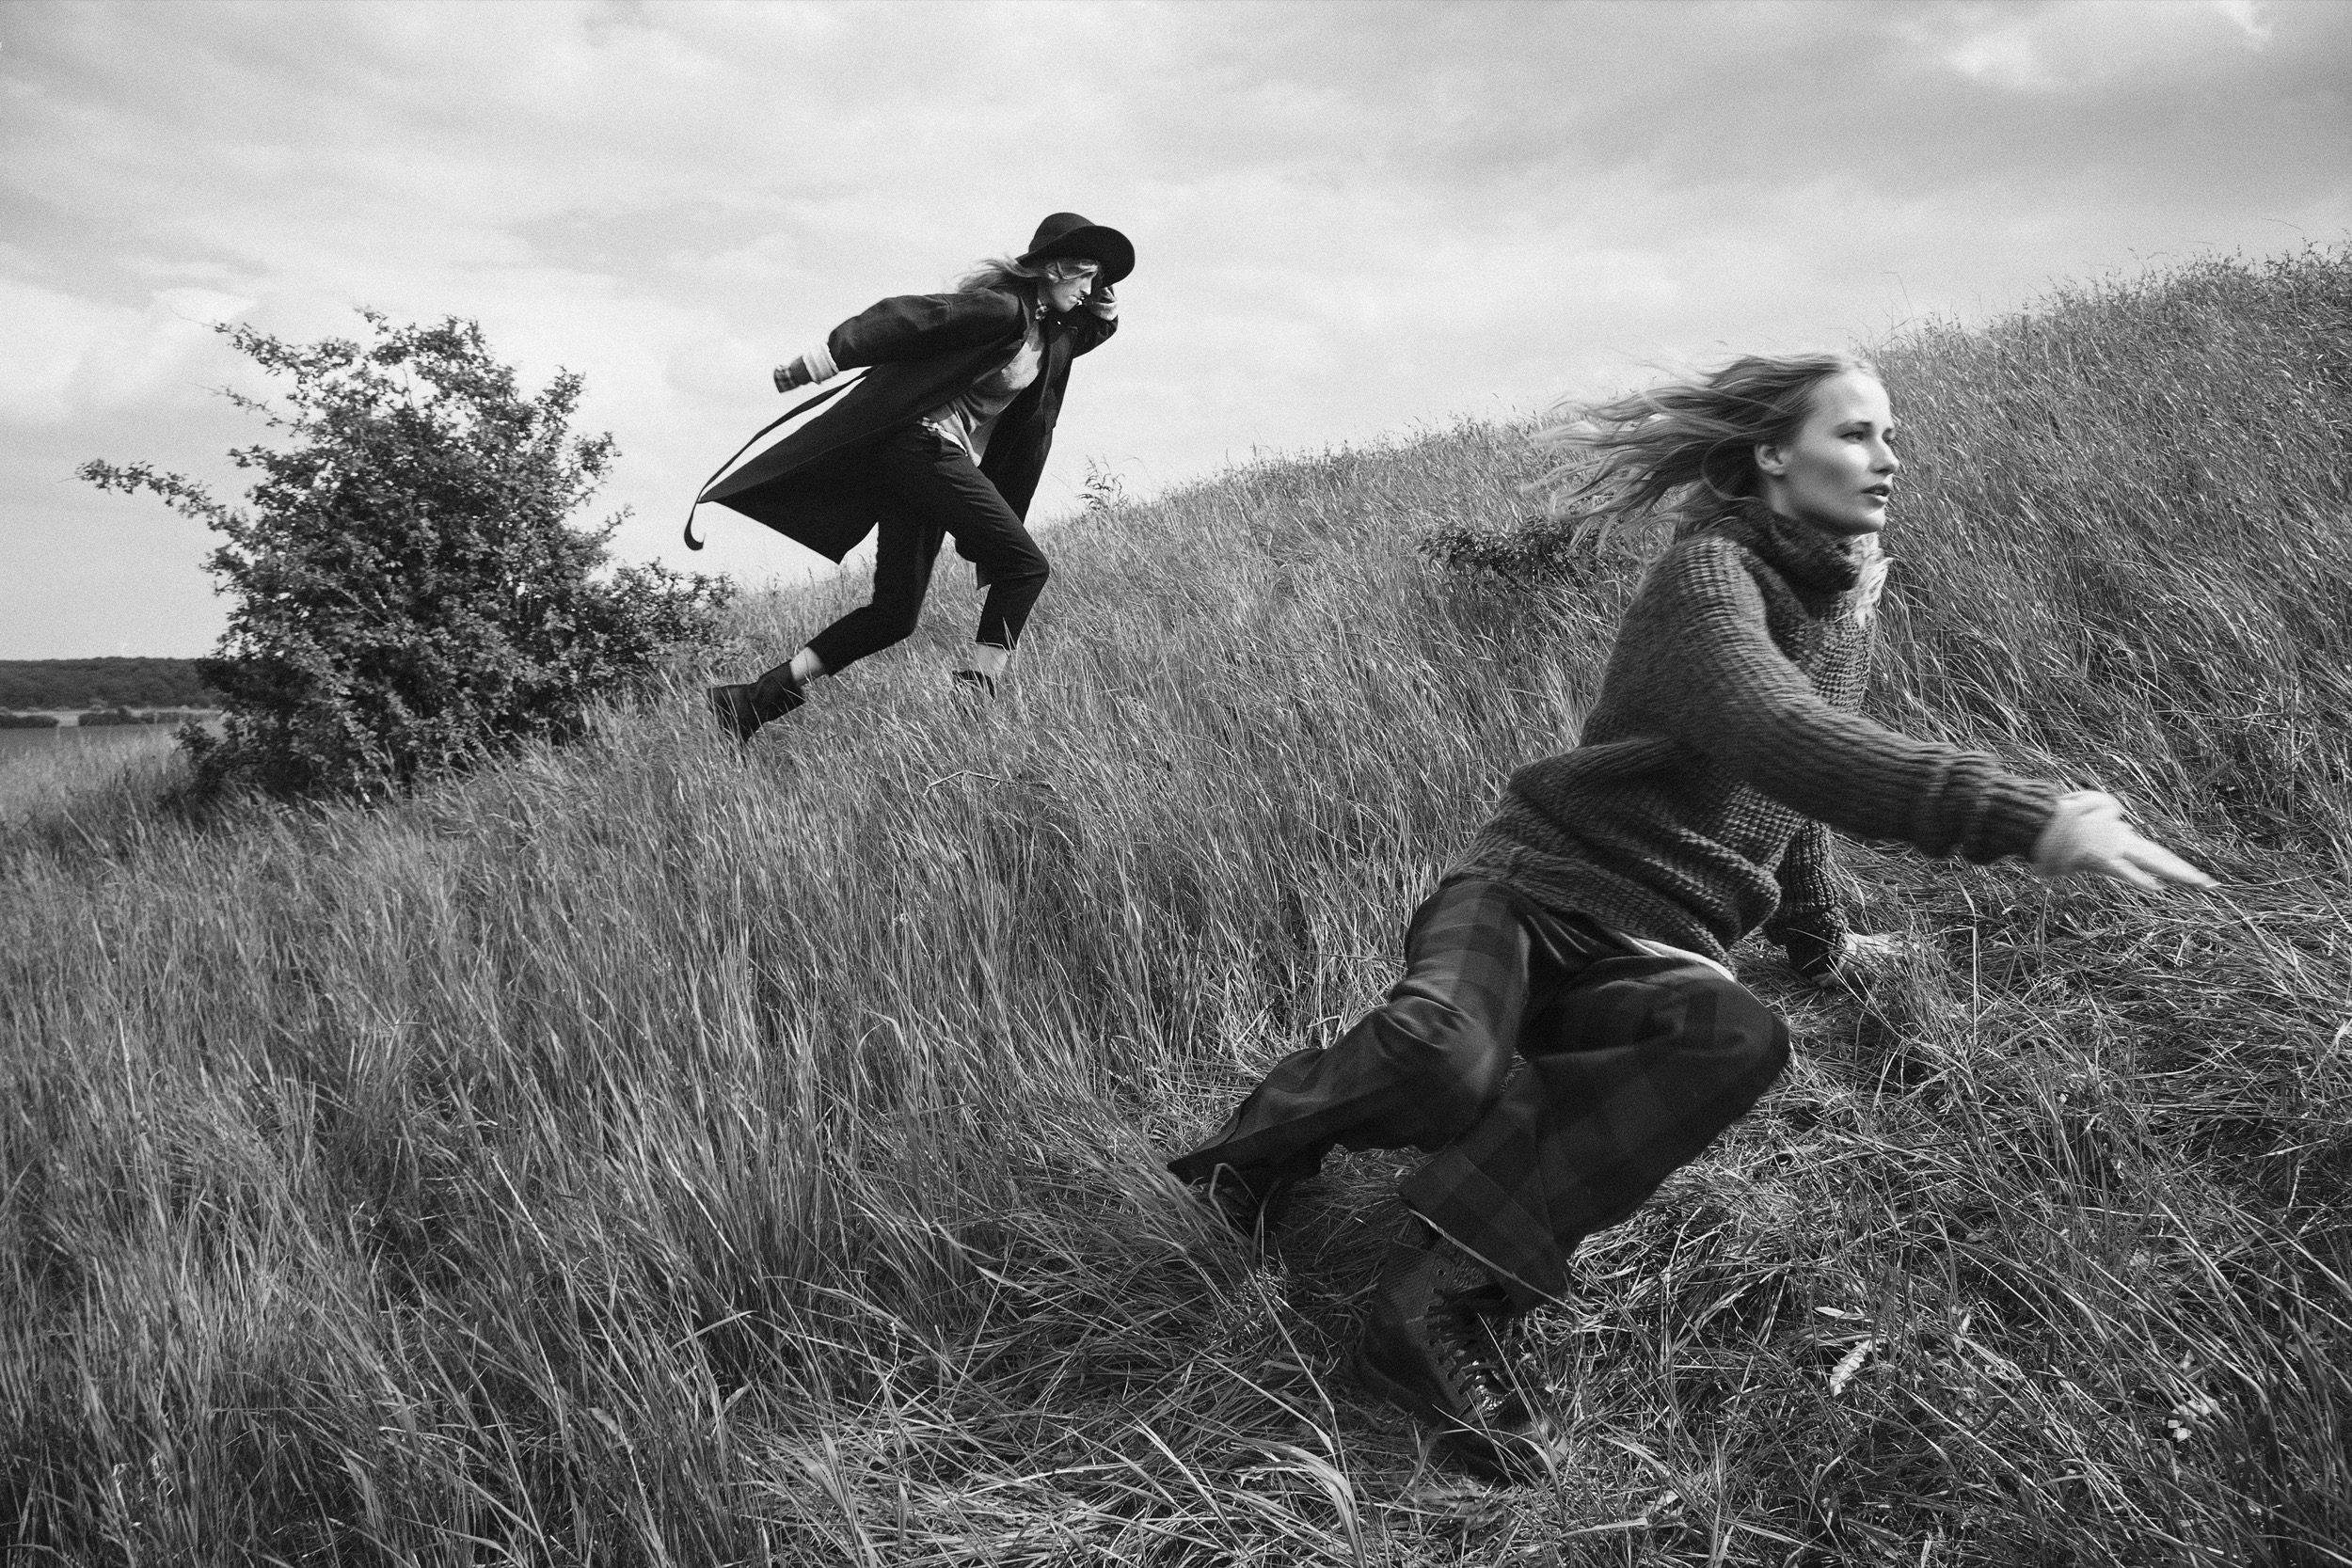 kathrin-hohberg-people-mag-chasing-up-hills-niels-bruchmann-01